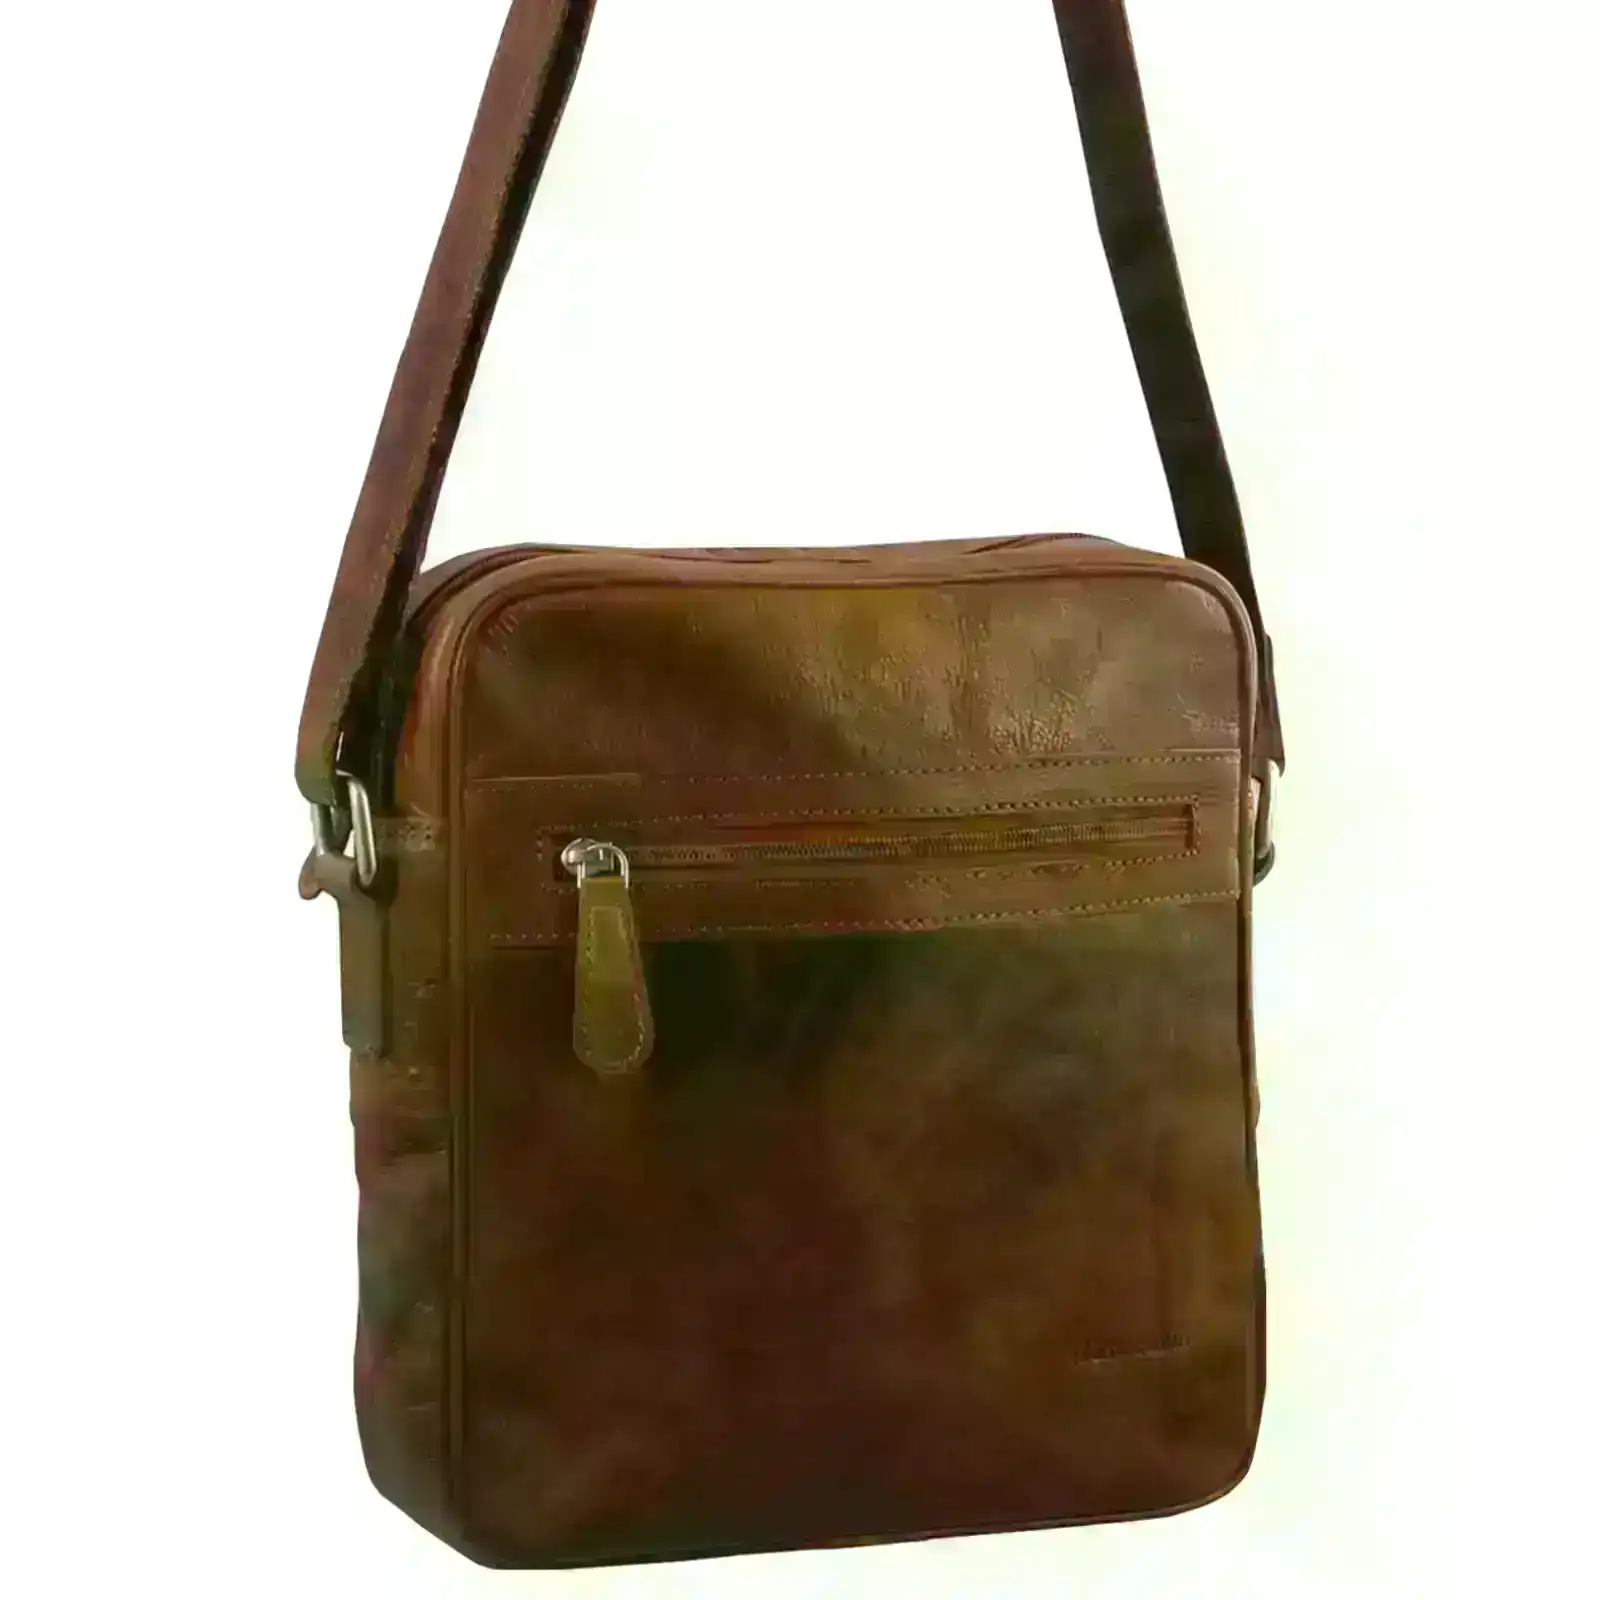 Pierre Cardin Mens Rustic Leather Shoulder Bag for Tablet iPad Pouch Case Sling